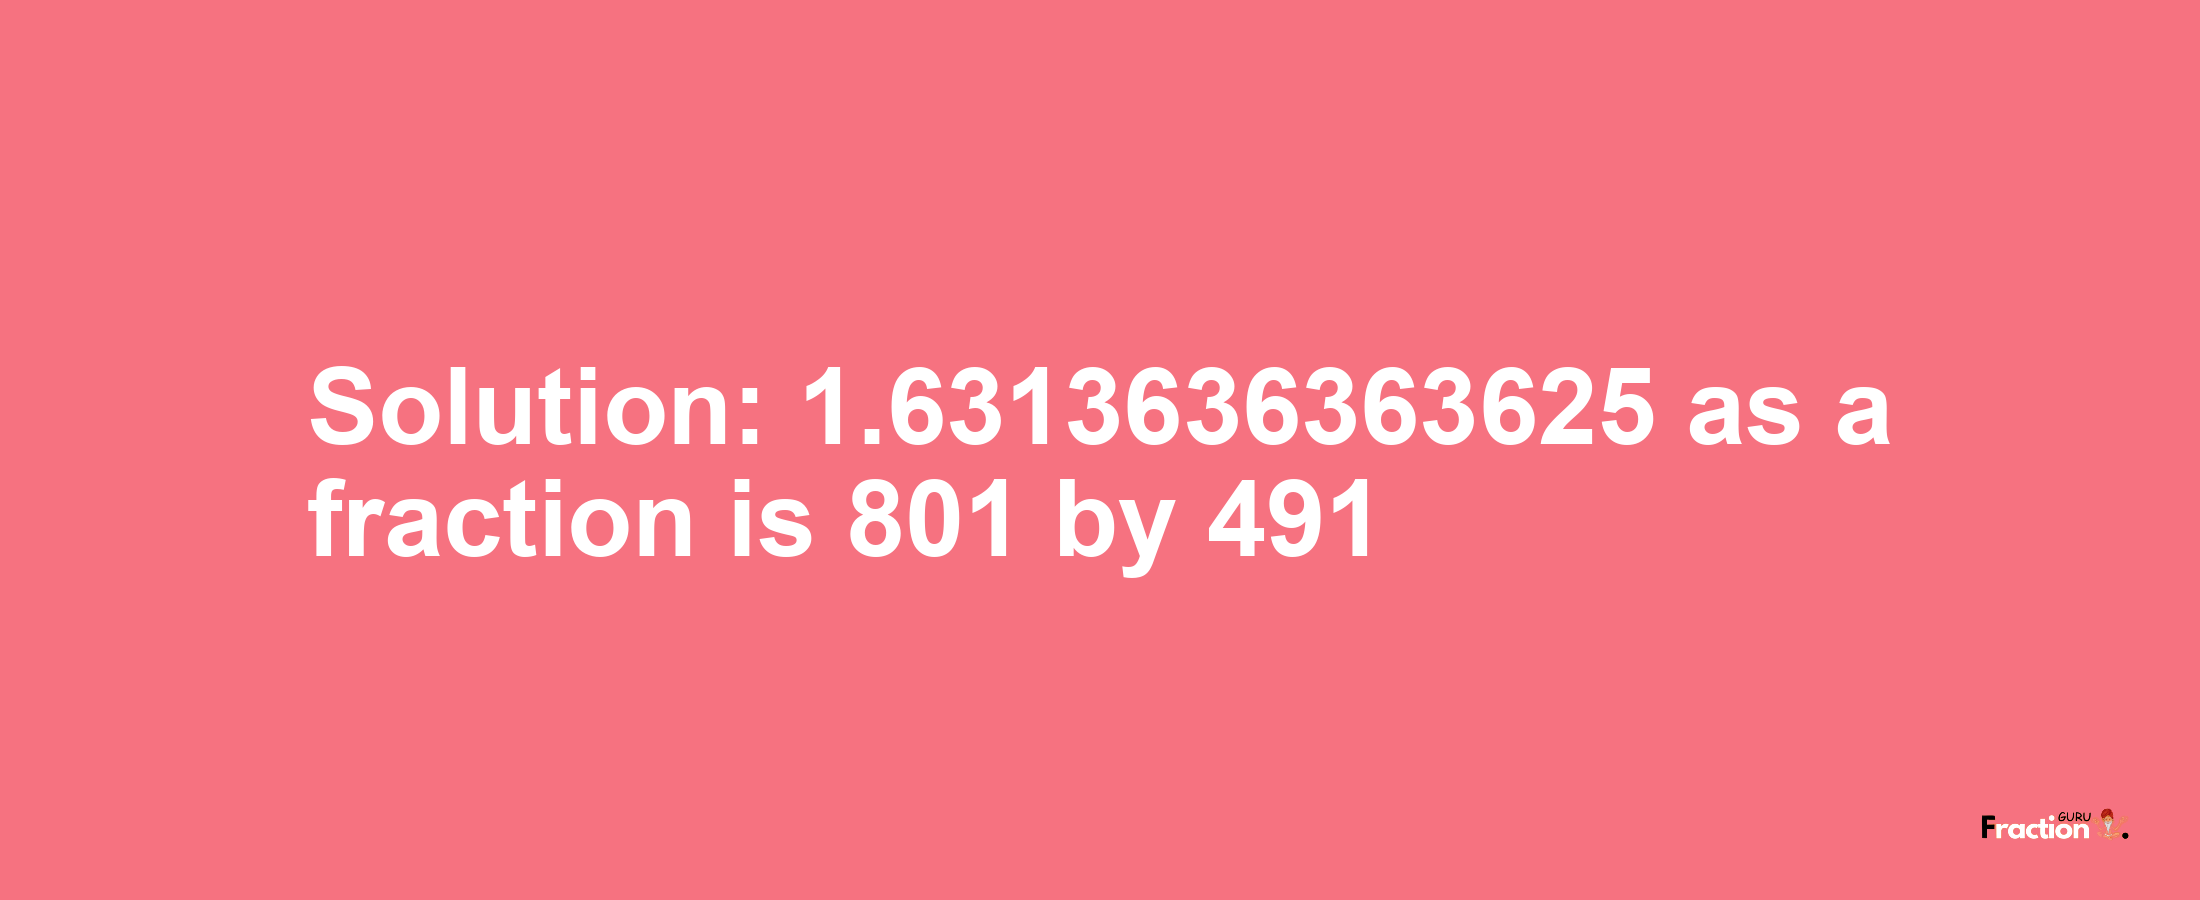 Solution:1.6313636363625 as a fraction is 801/491